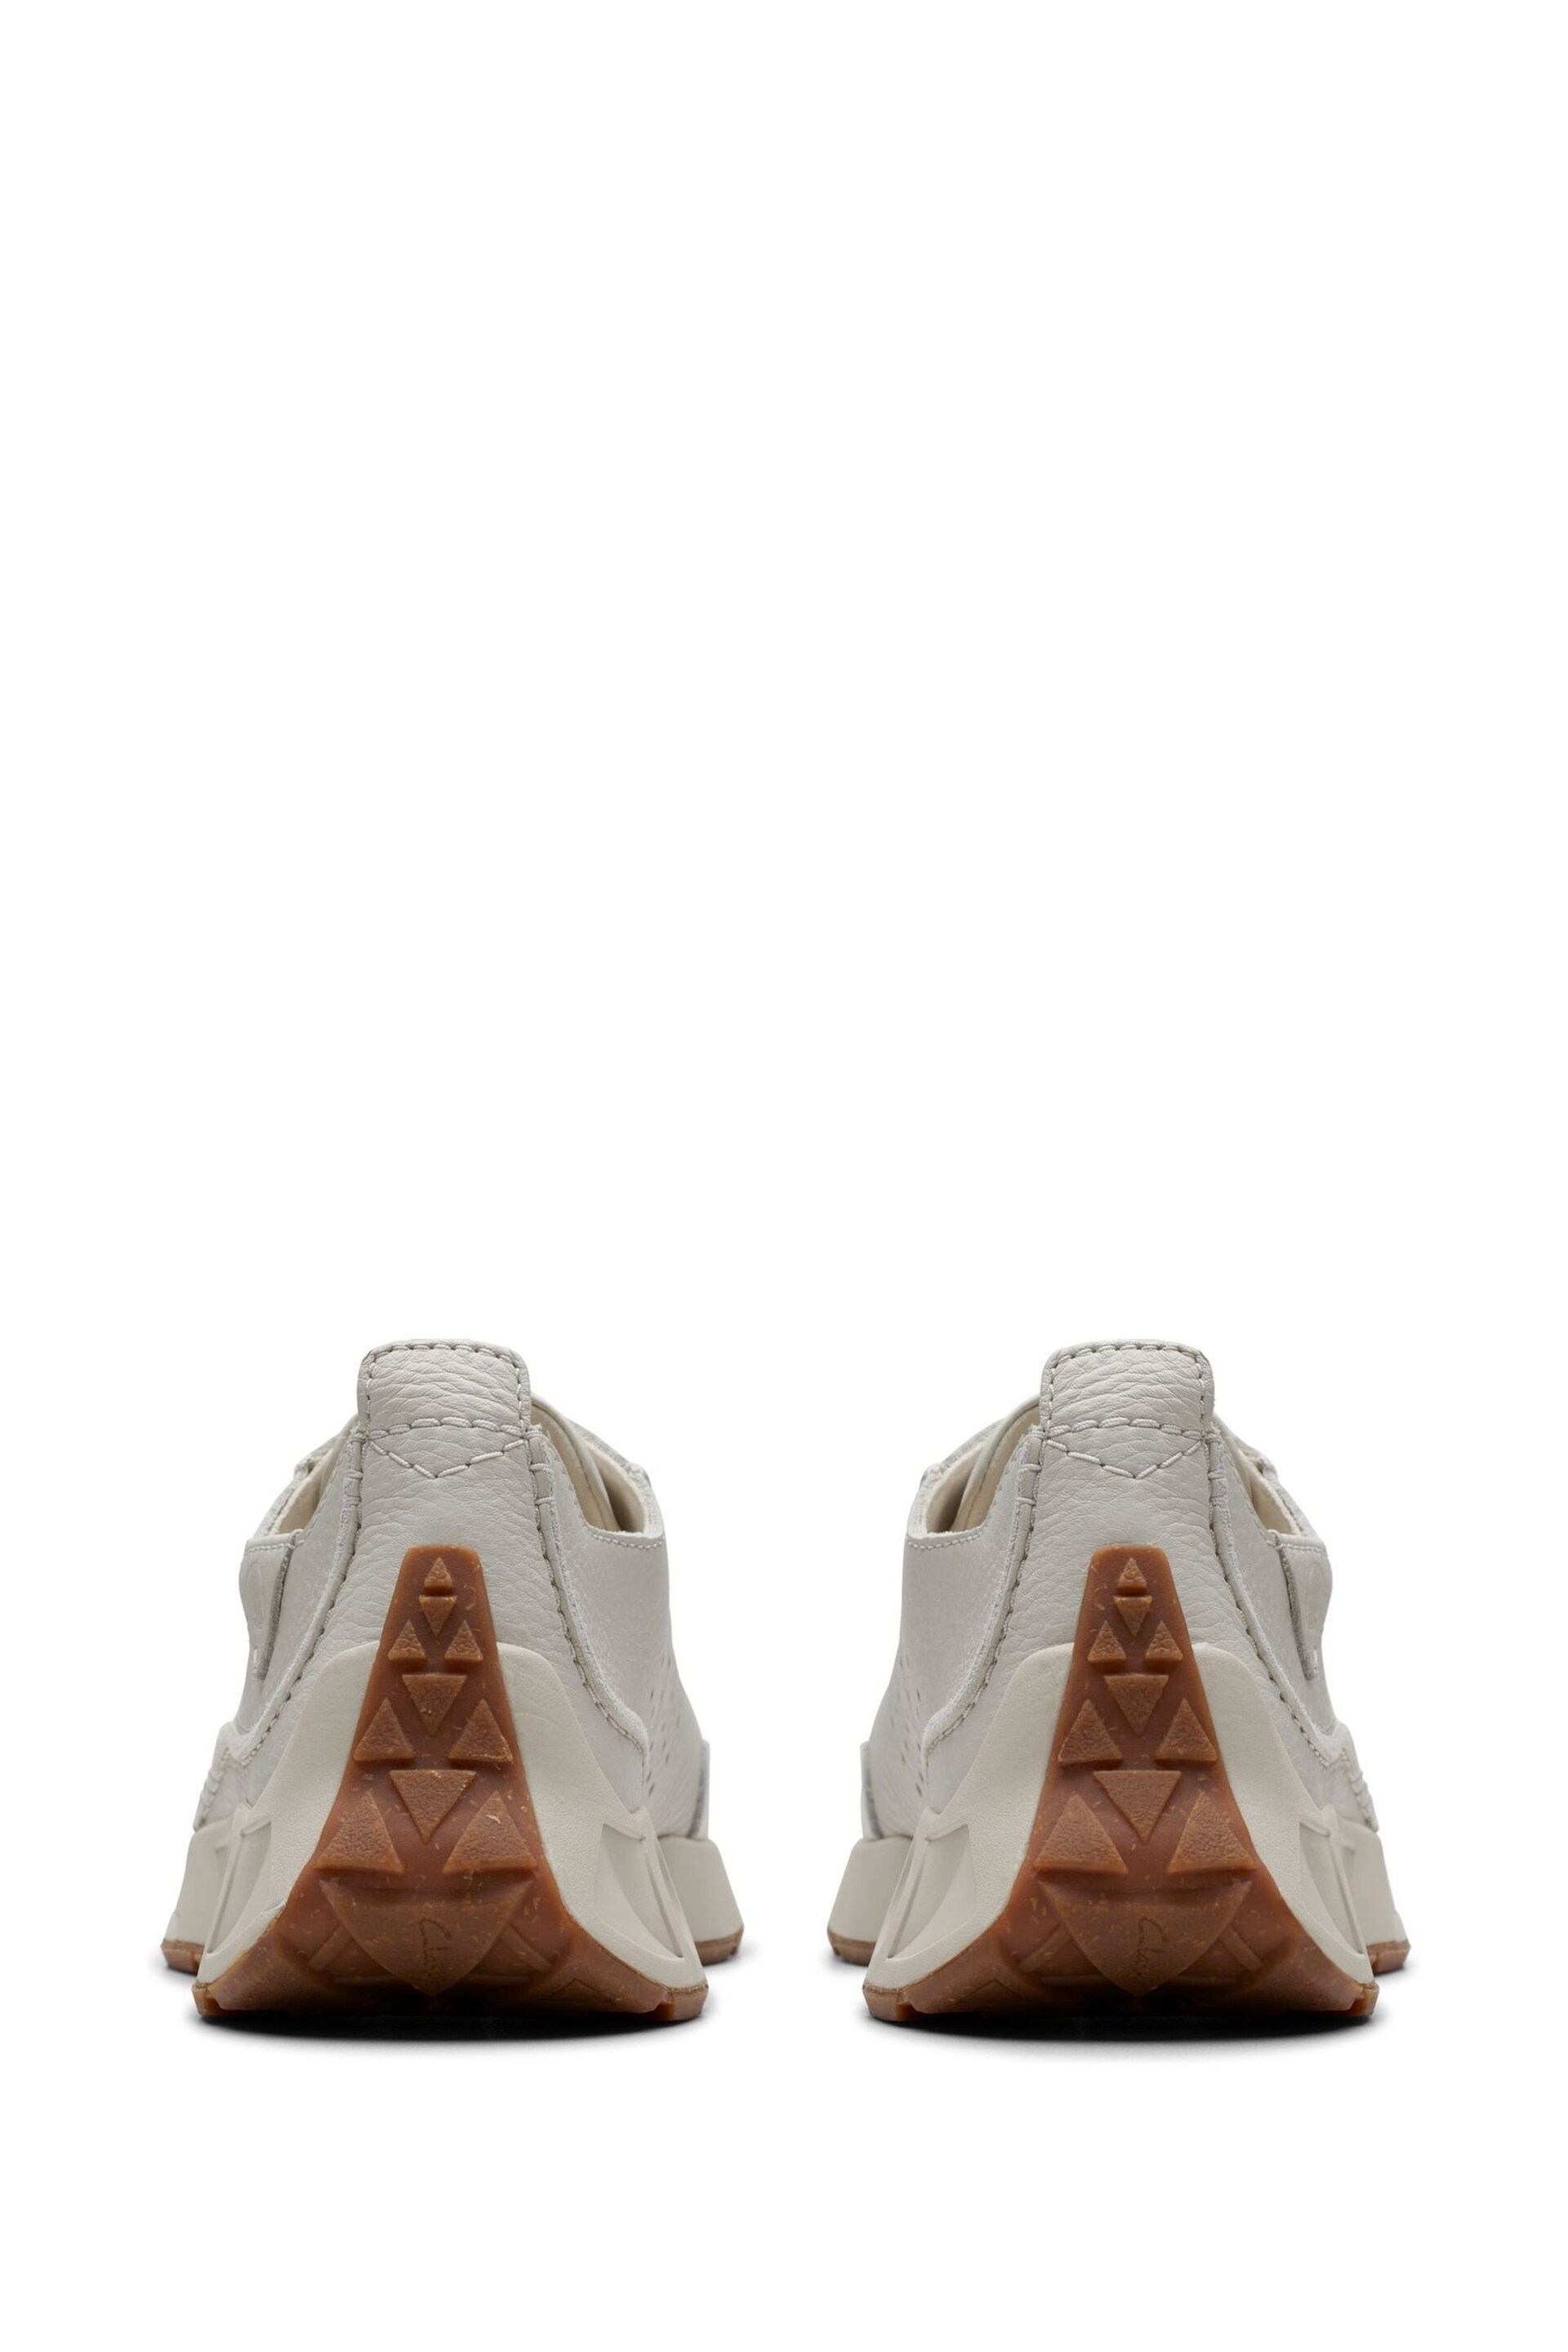 Clarks White Leather Craft Speed Shoes - Image 5 of 7